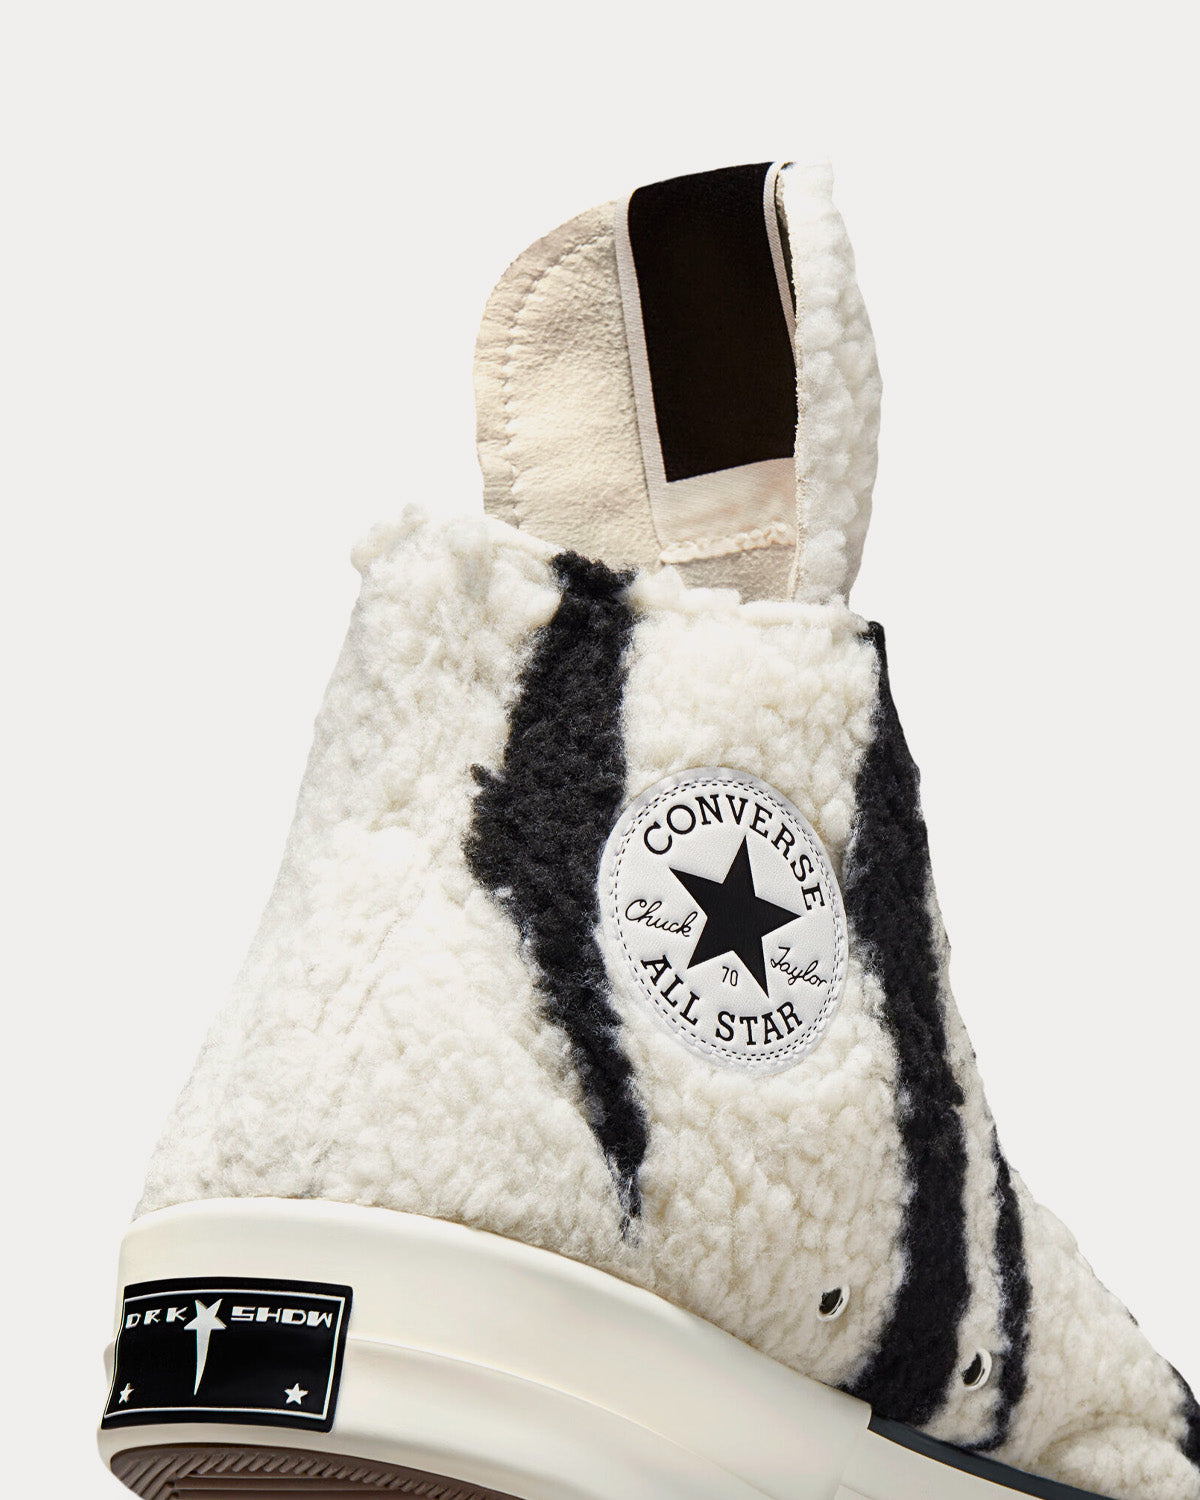 Converse x Rick Owens DRKSHDW - Chuck 70 Lily White / Black / Egret High Top Sneakers